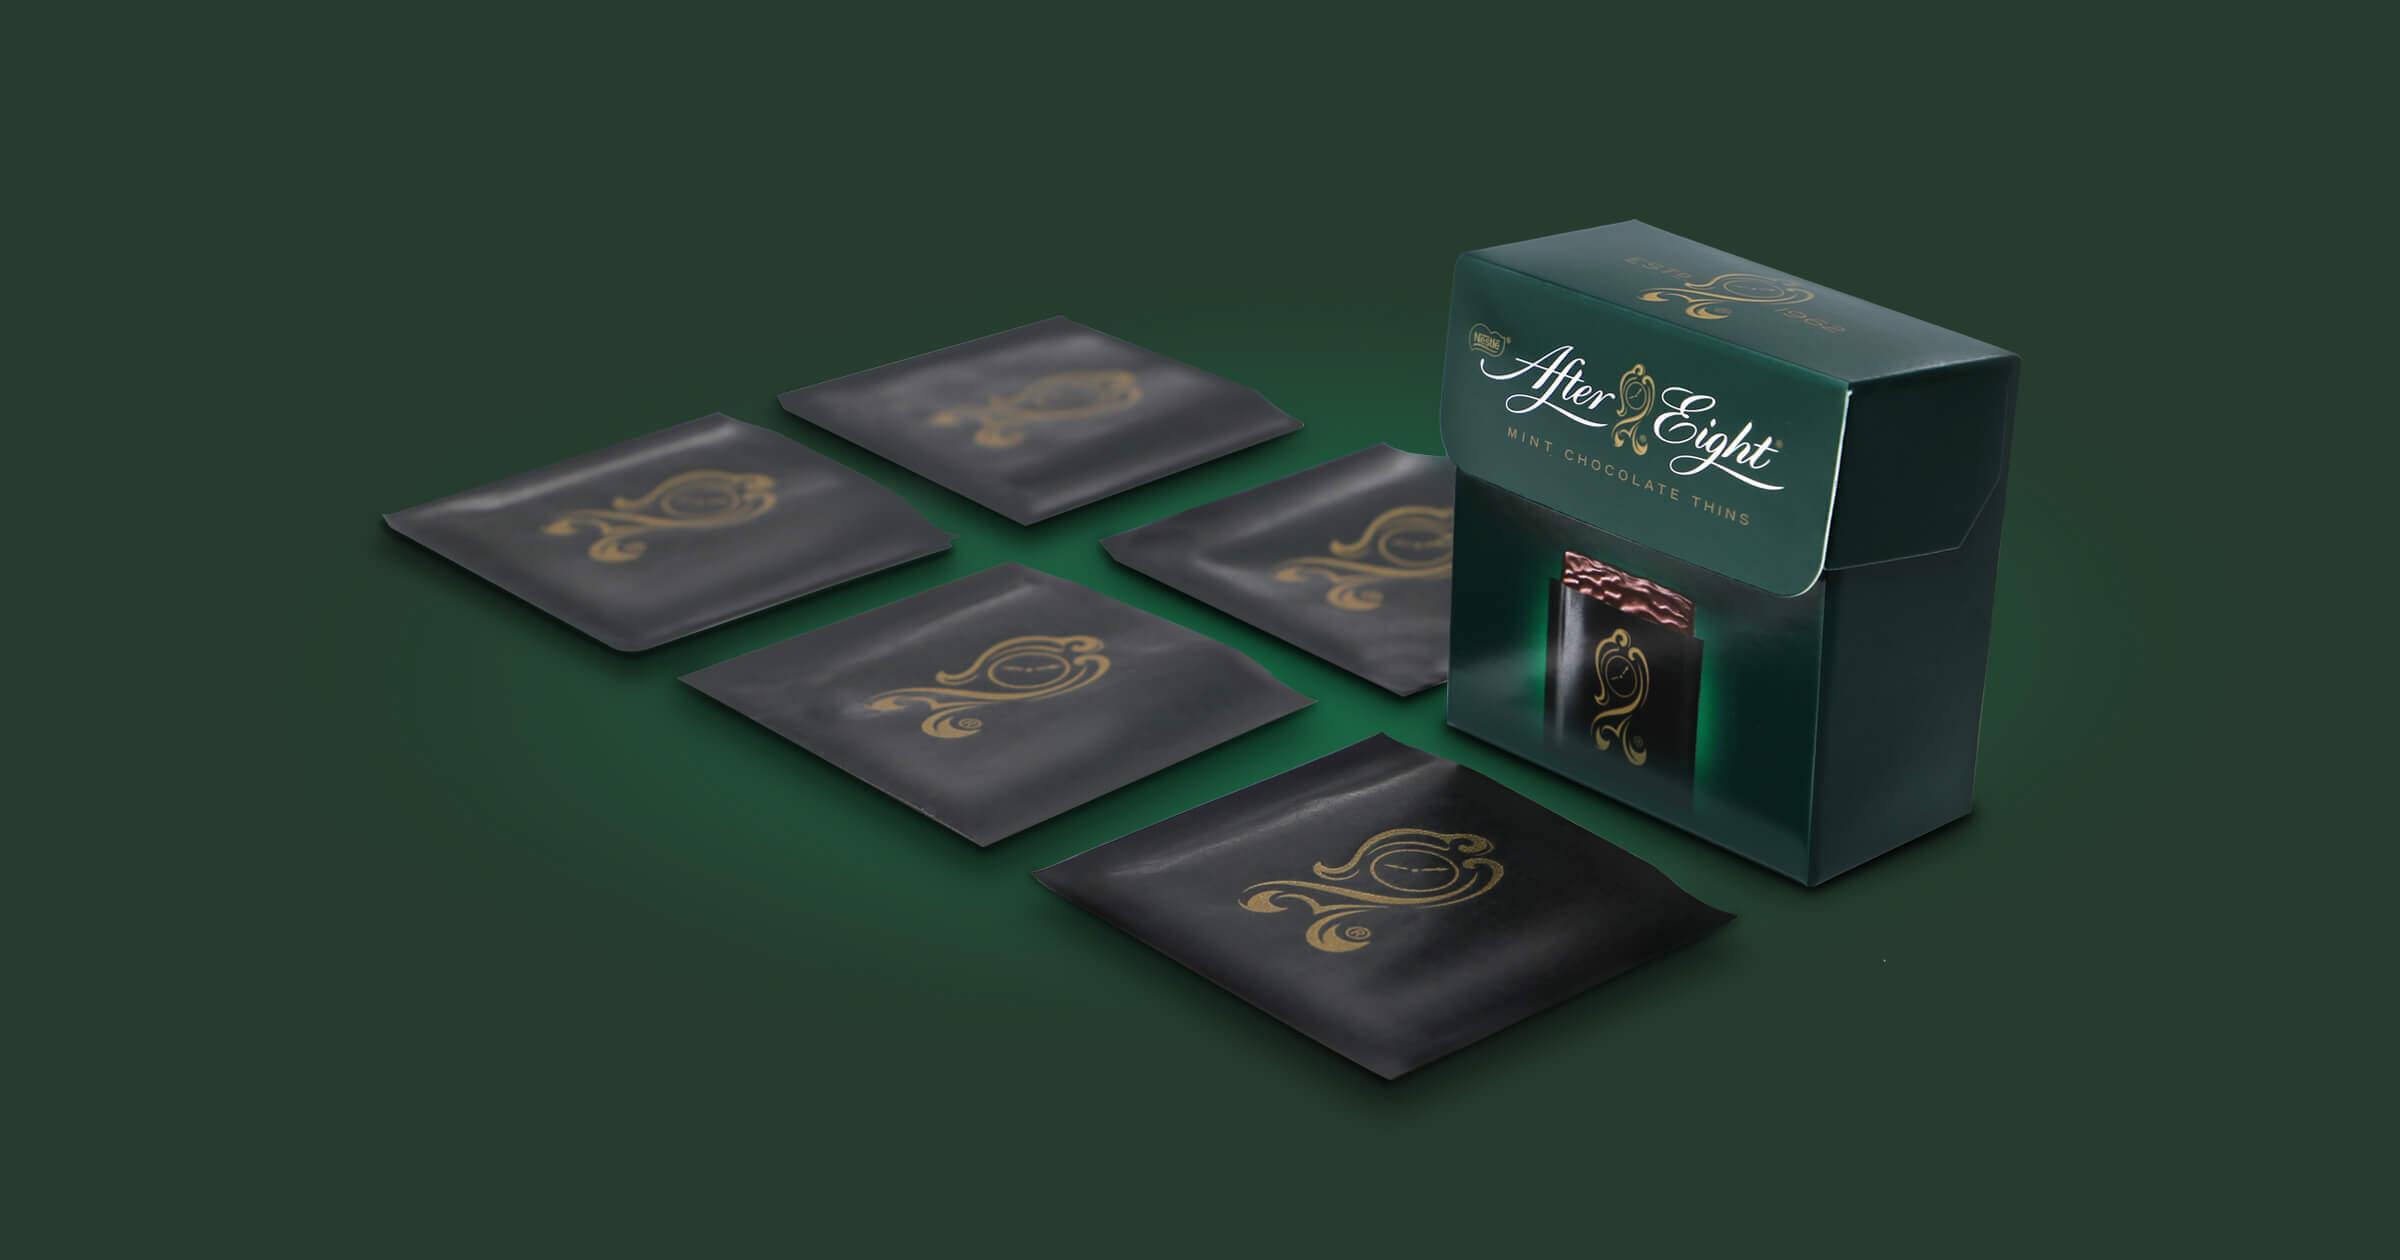 Packaging Design After Eight